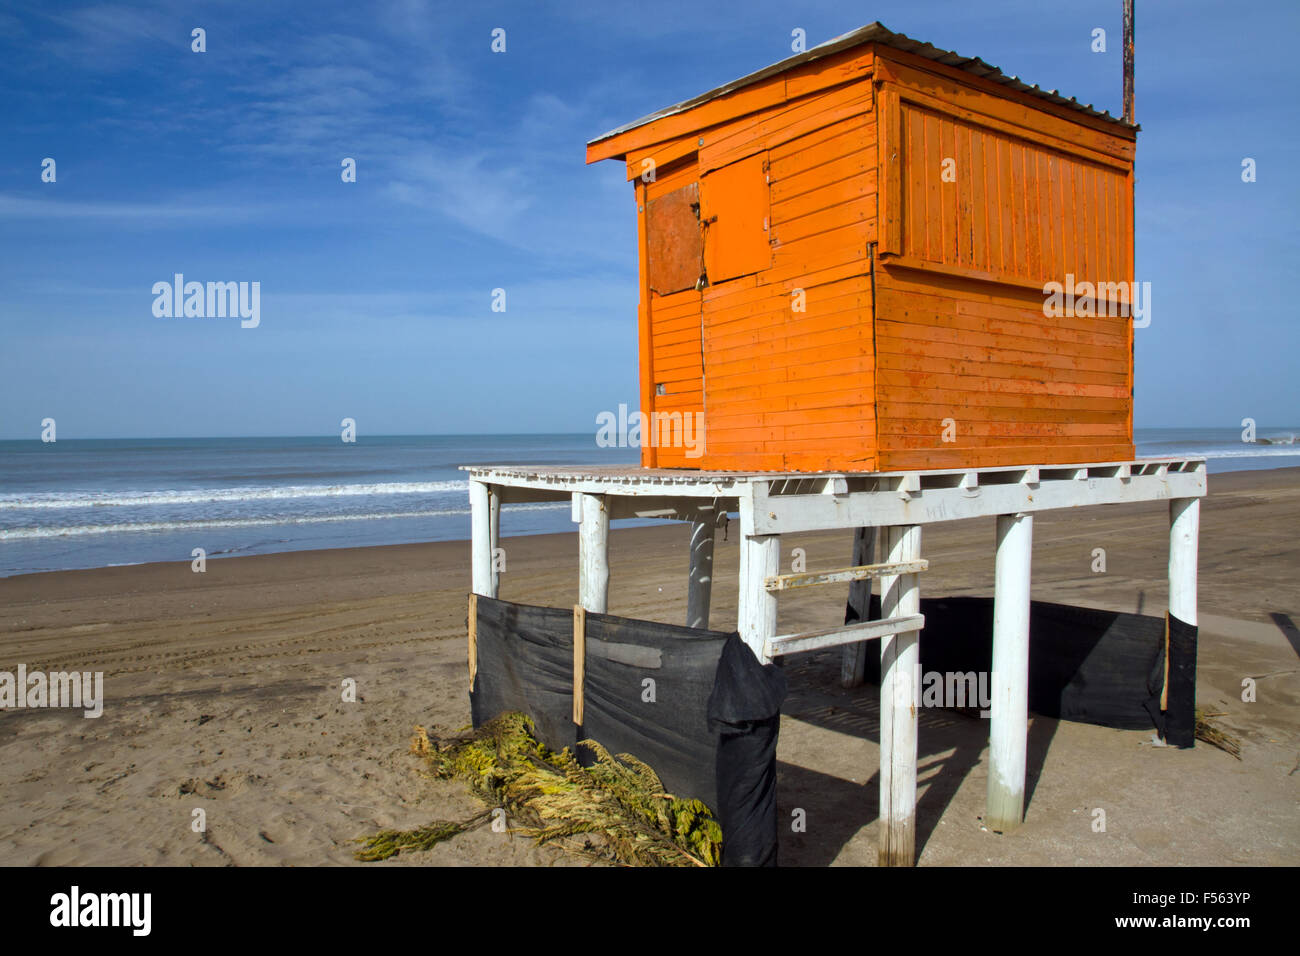 Lifeguard tower at the argentinean atlantic coast Stock Photo